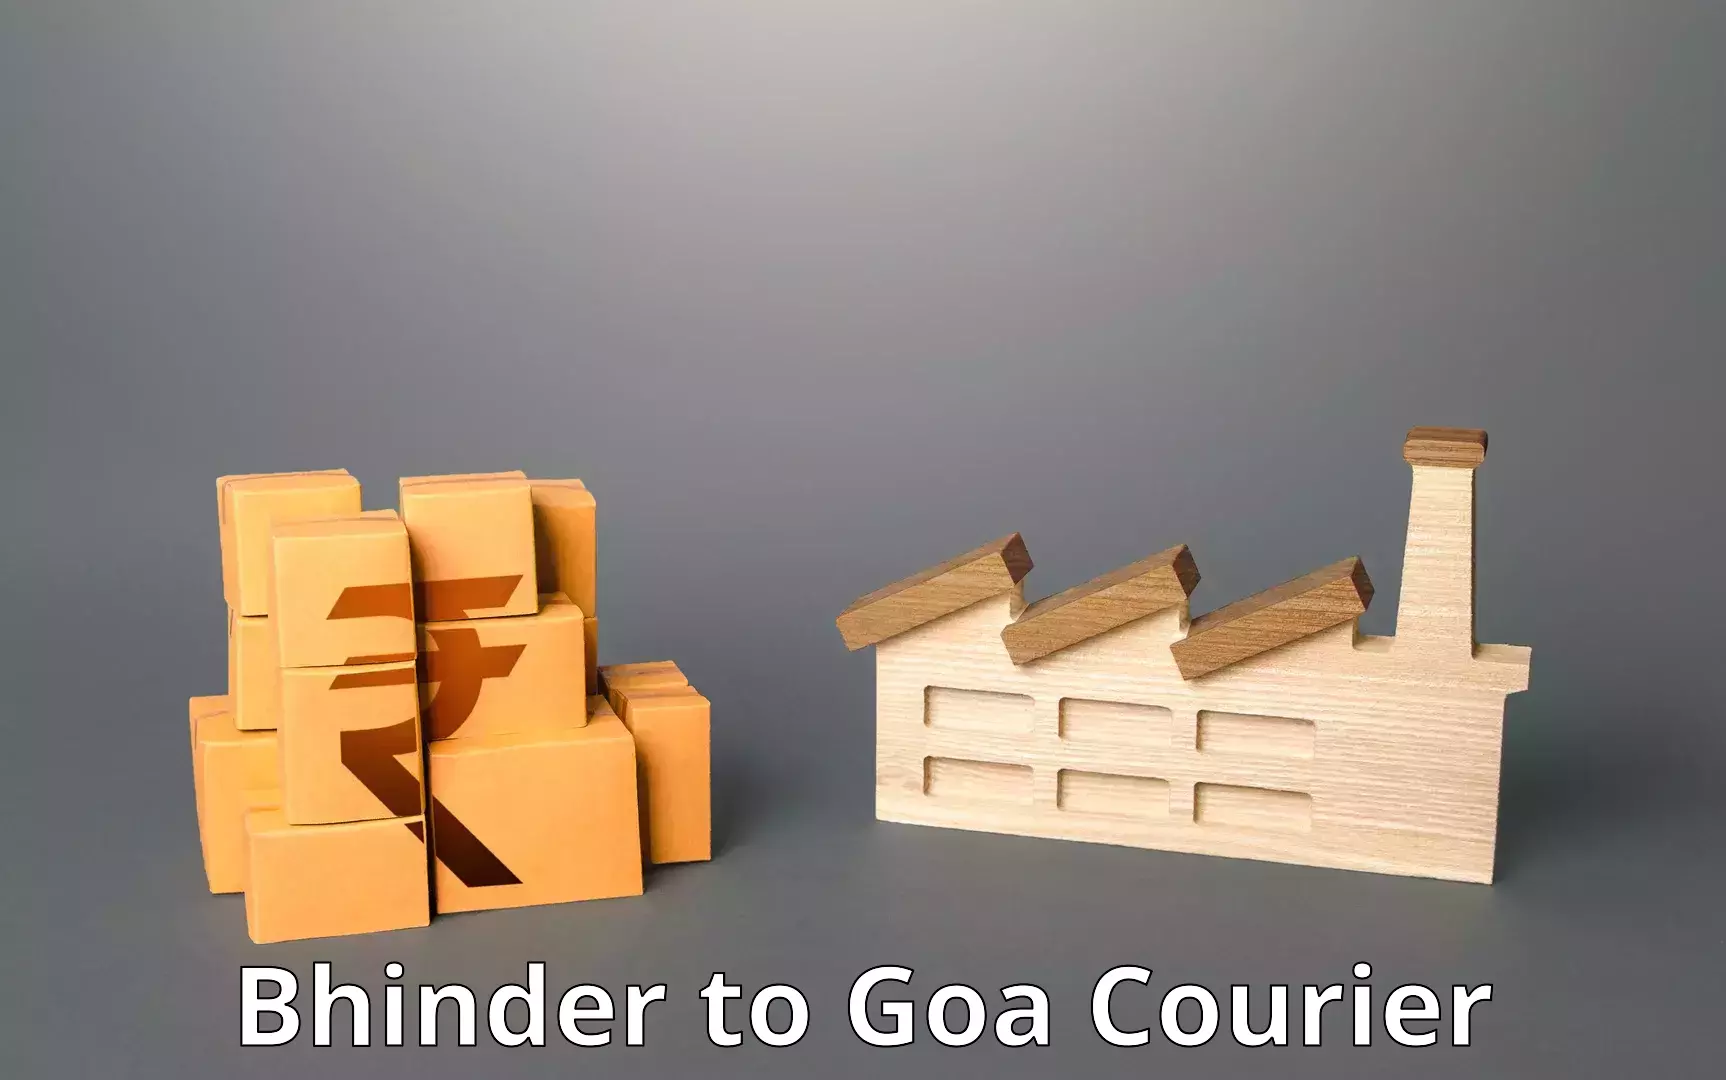 End-to-end delivery in Bhinder to Vasco da Gama